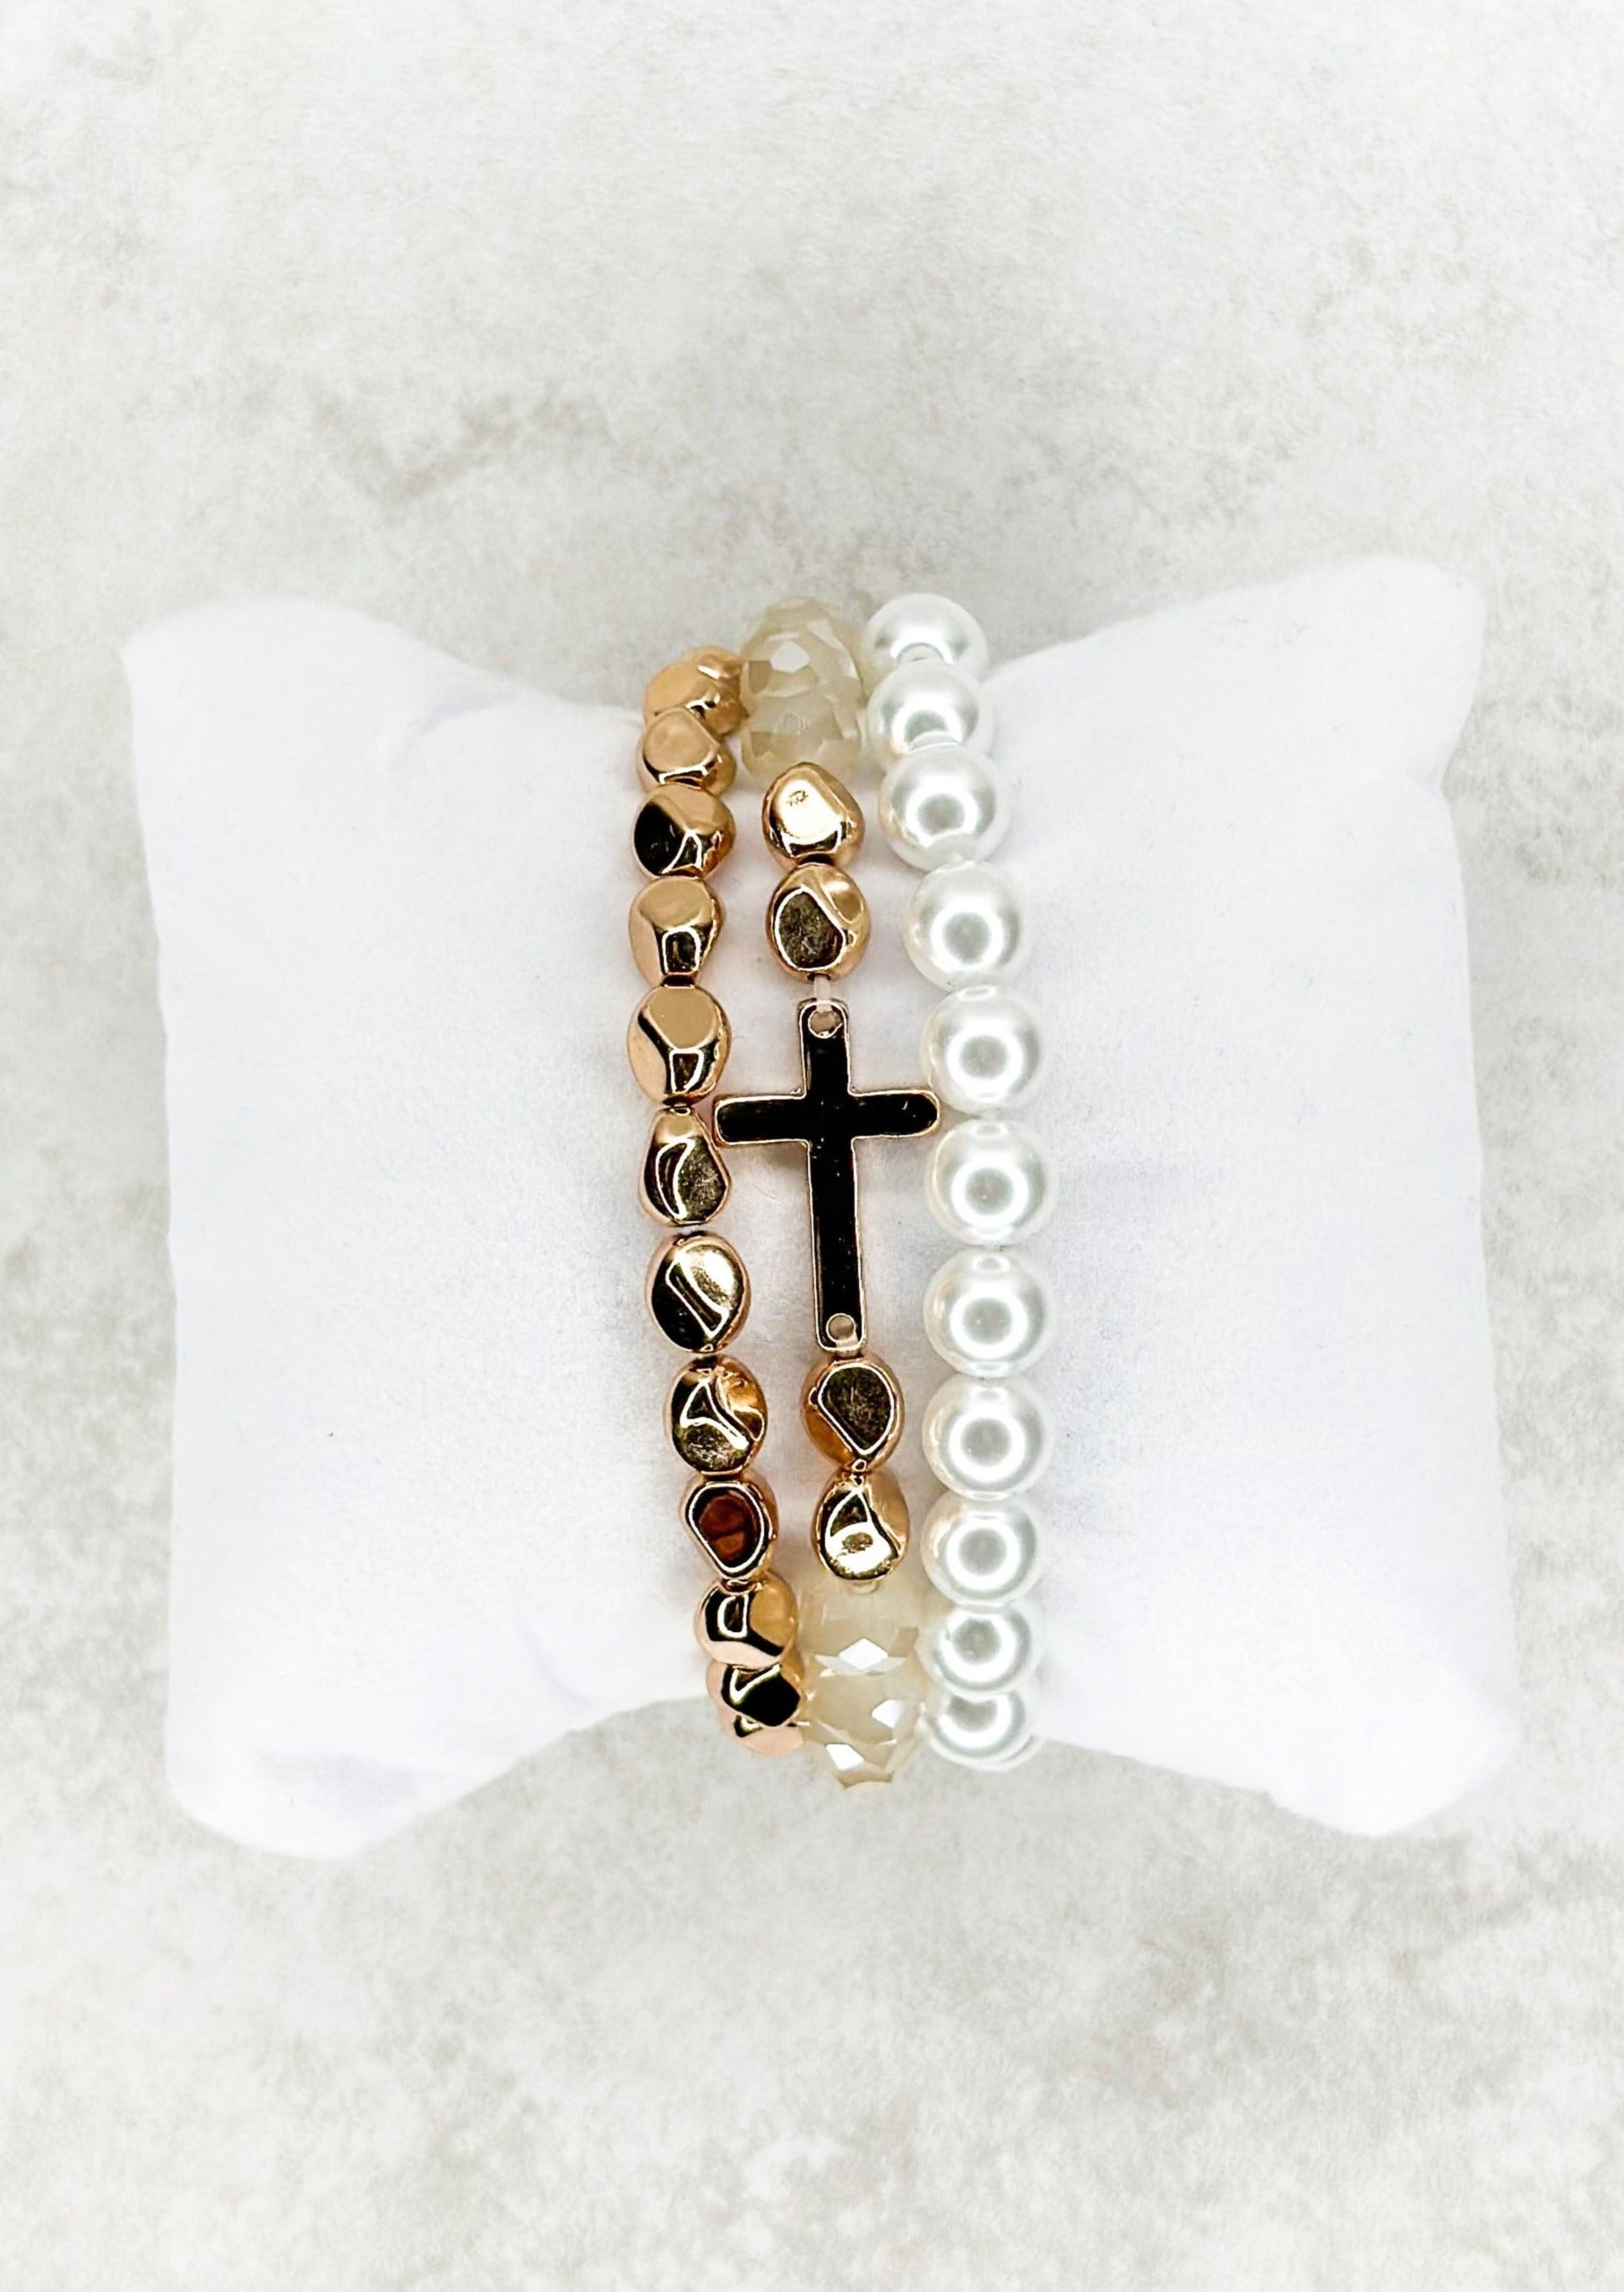 3 strand beaded stretch bracelets - one gold, one white pearl looking - one champagne colored with gold and a single gold cross